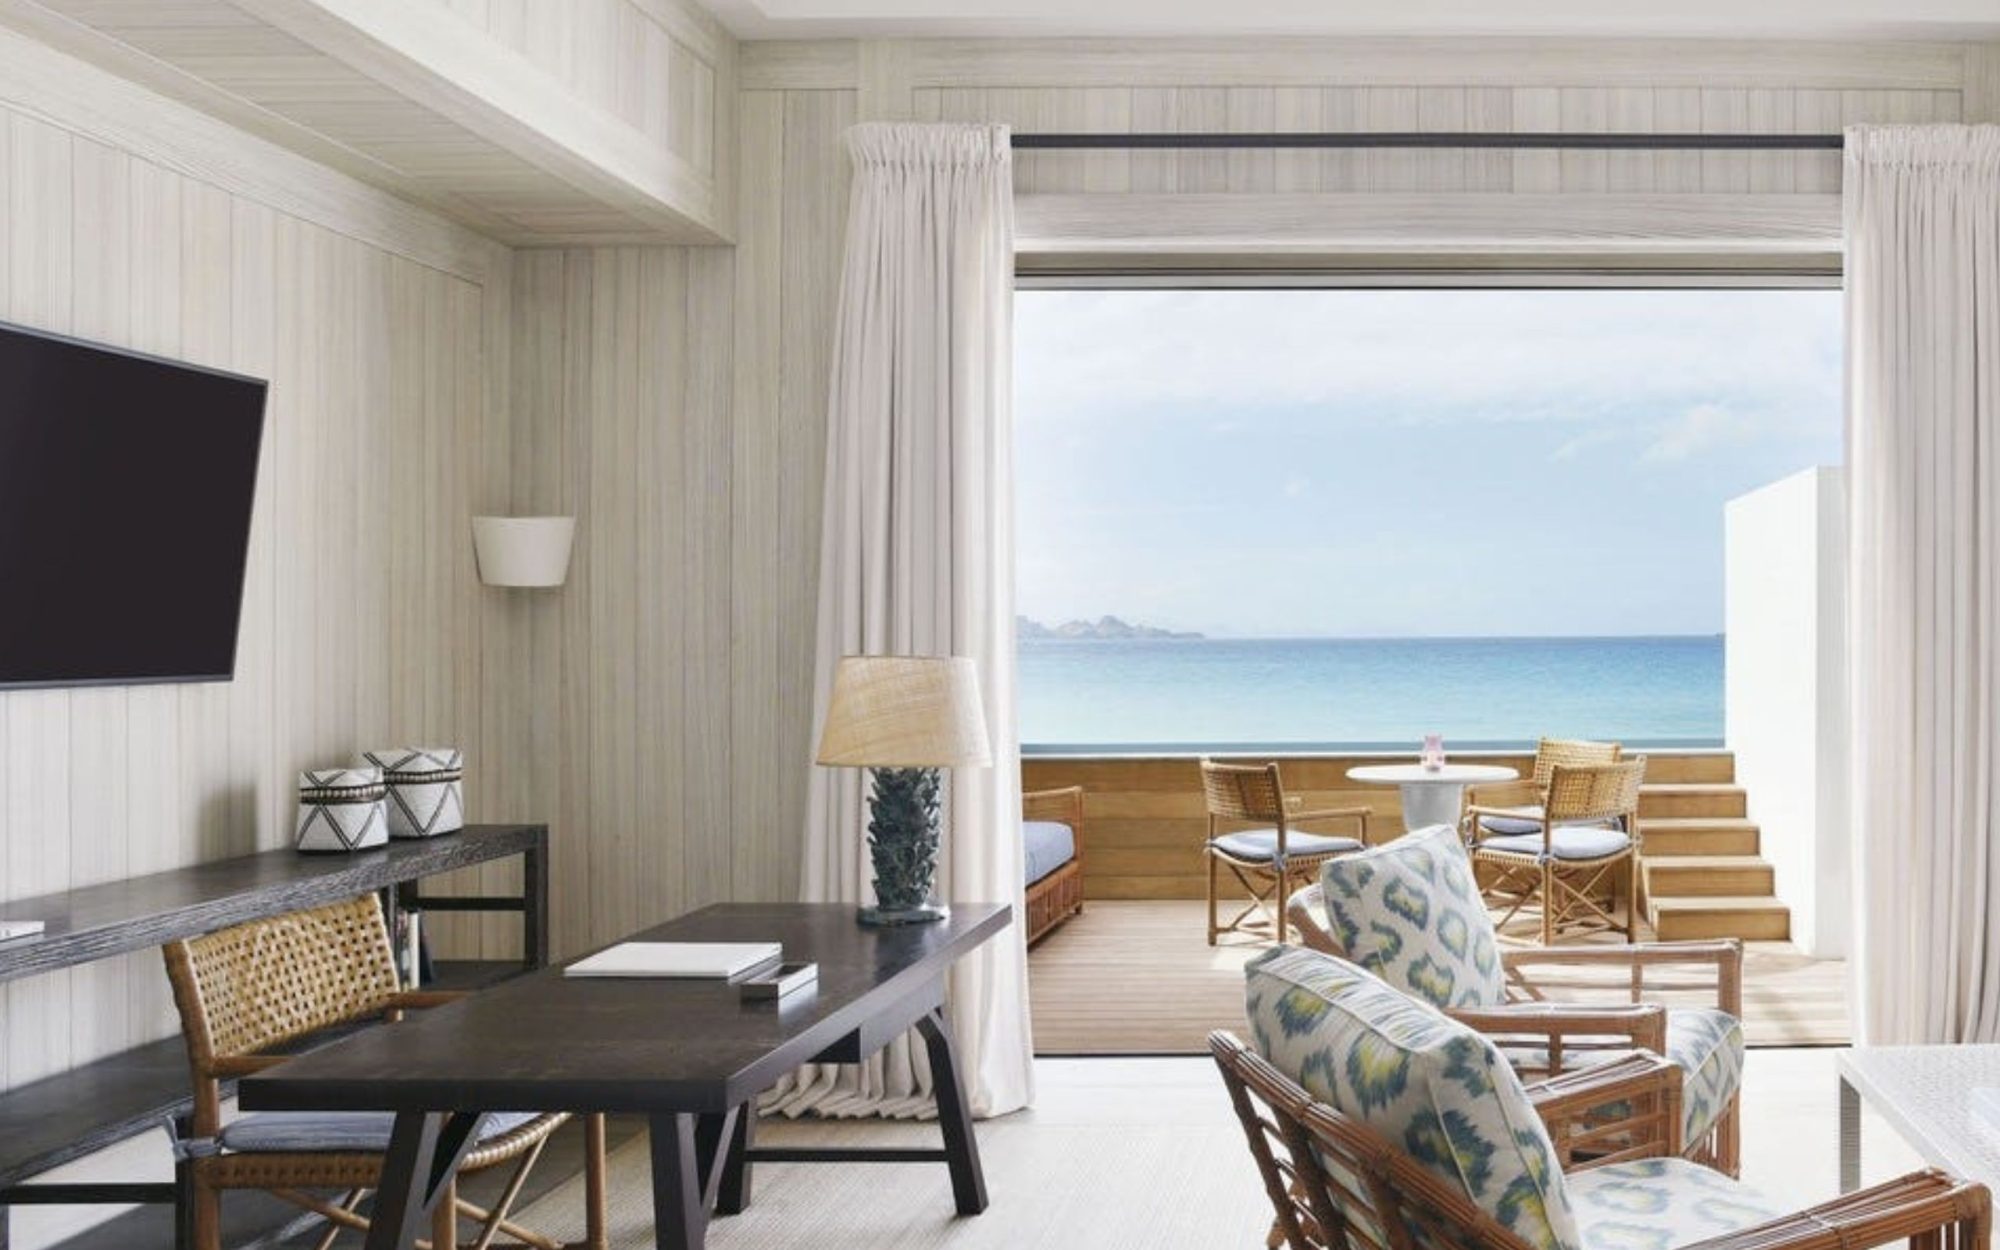 Cheval Blanc St-Barth is the definition of classic luxury in the Caribbean